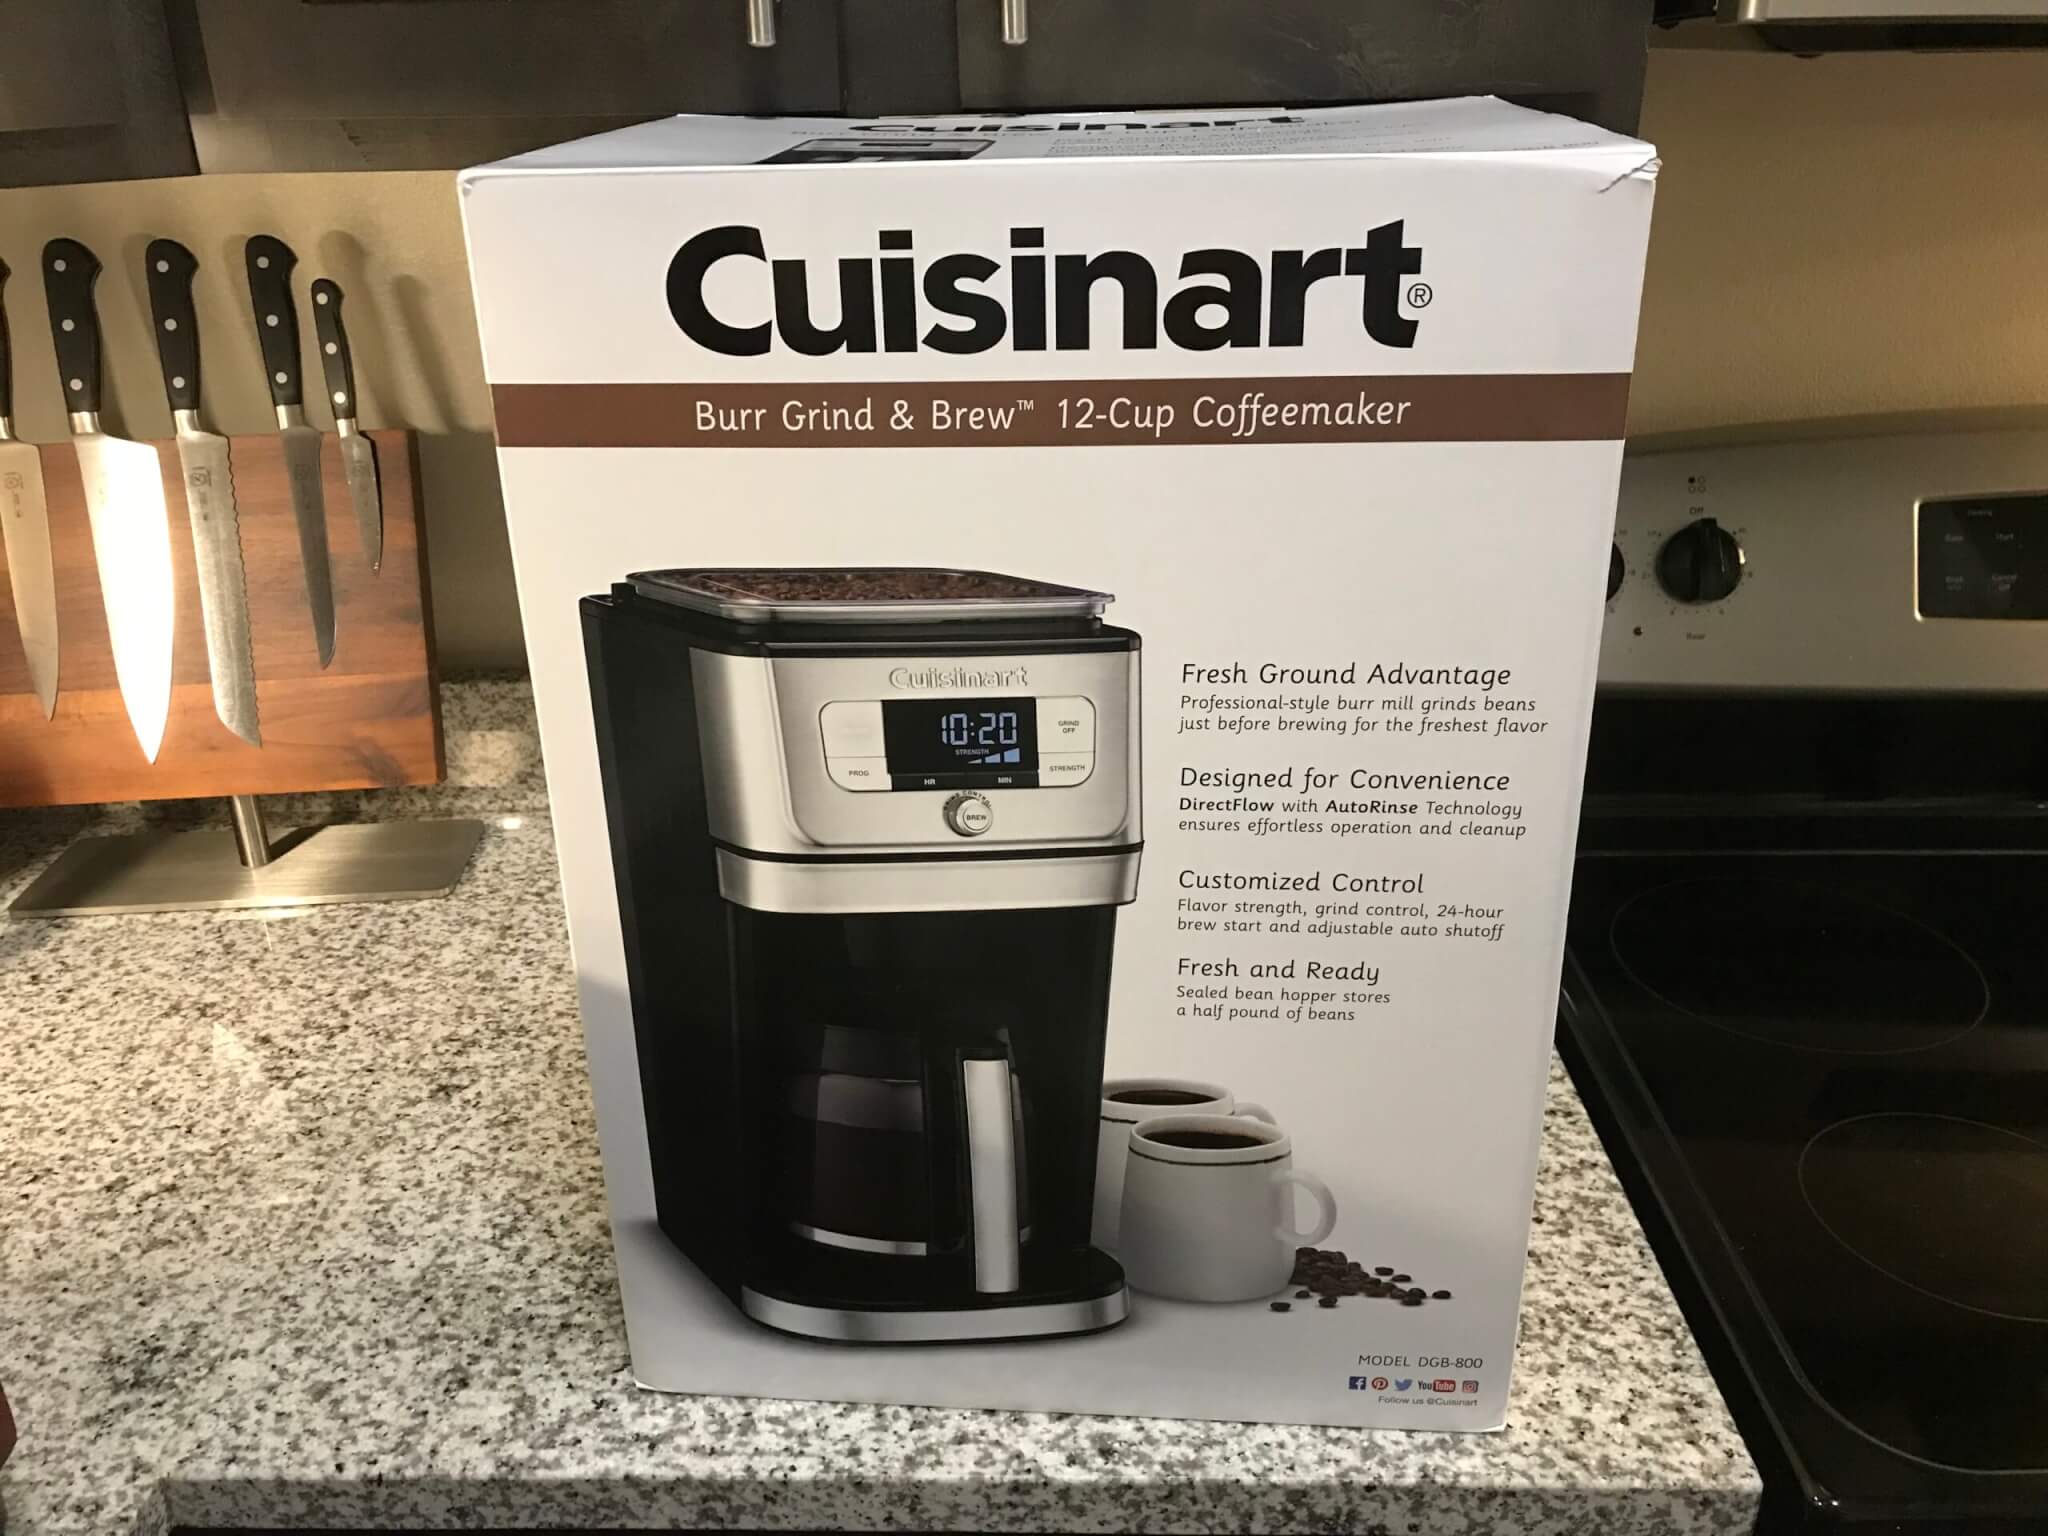 Cuisinart DGB-800 Fully Automatic Burr Grind & Brew, 12-Cup Glass in Box